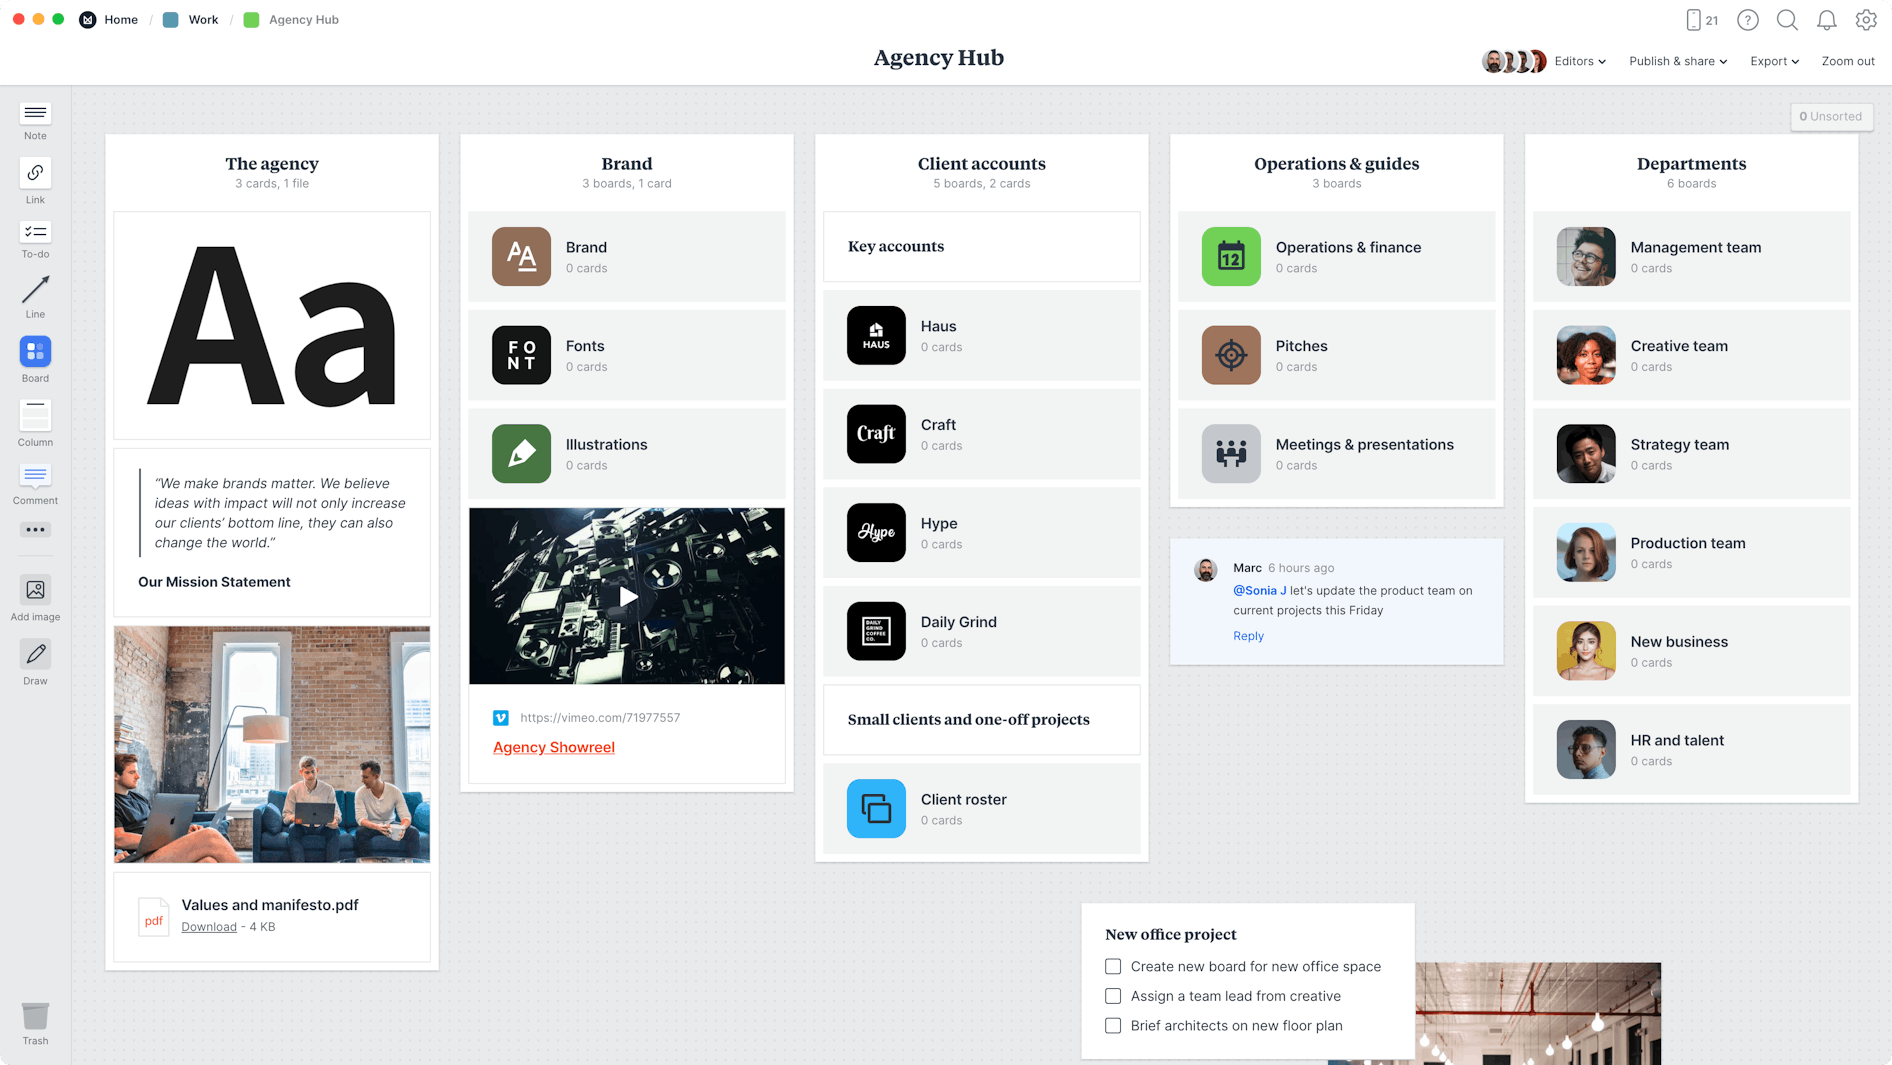 Agency Hub Template, within the Milanote app